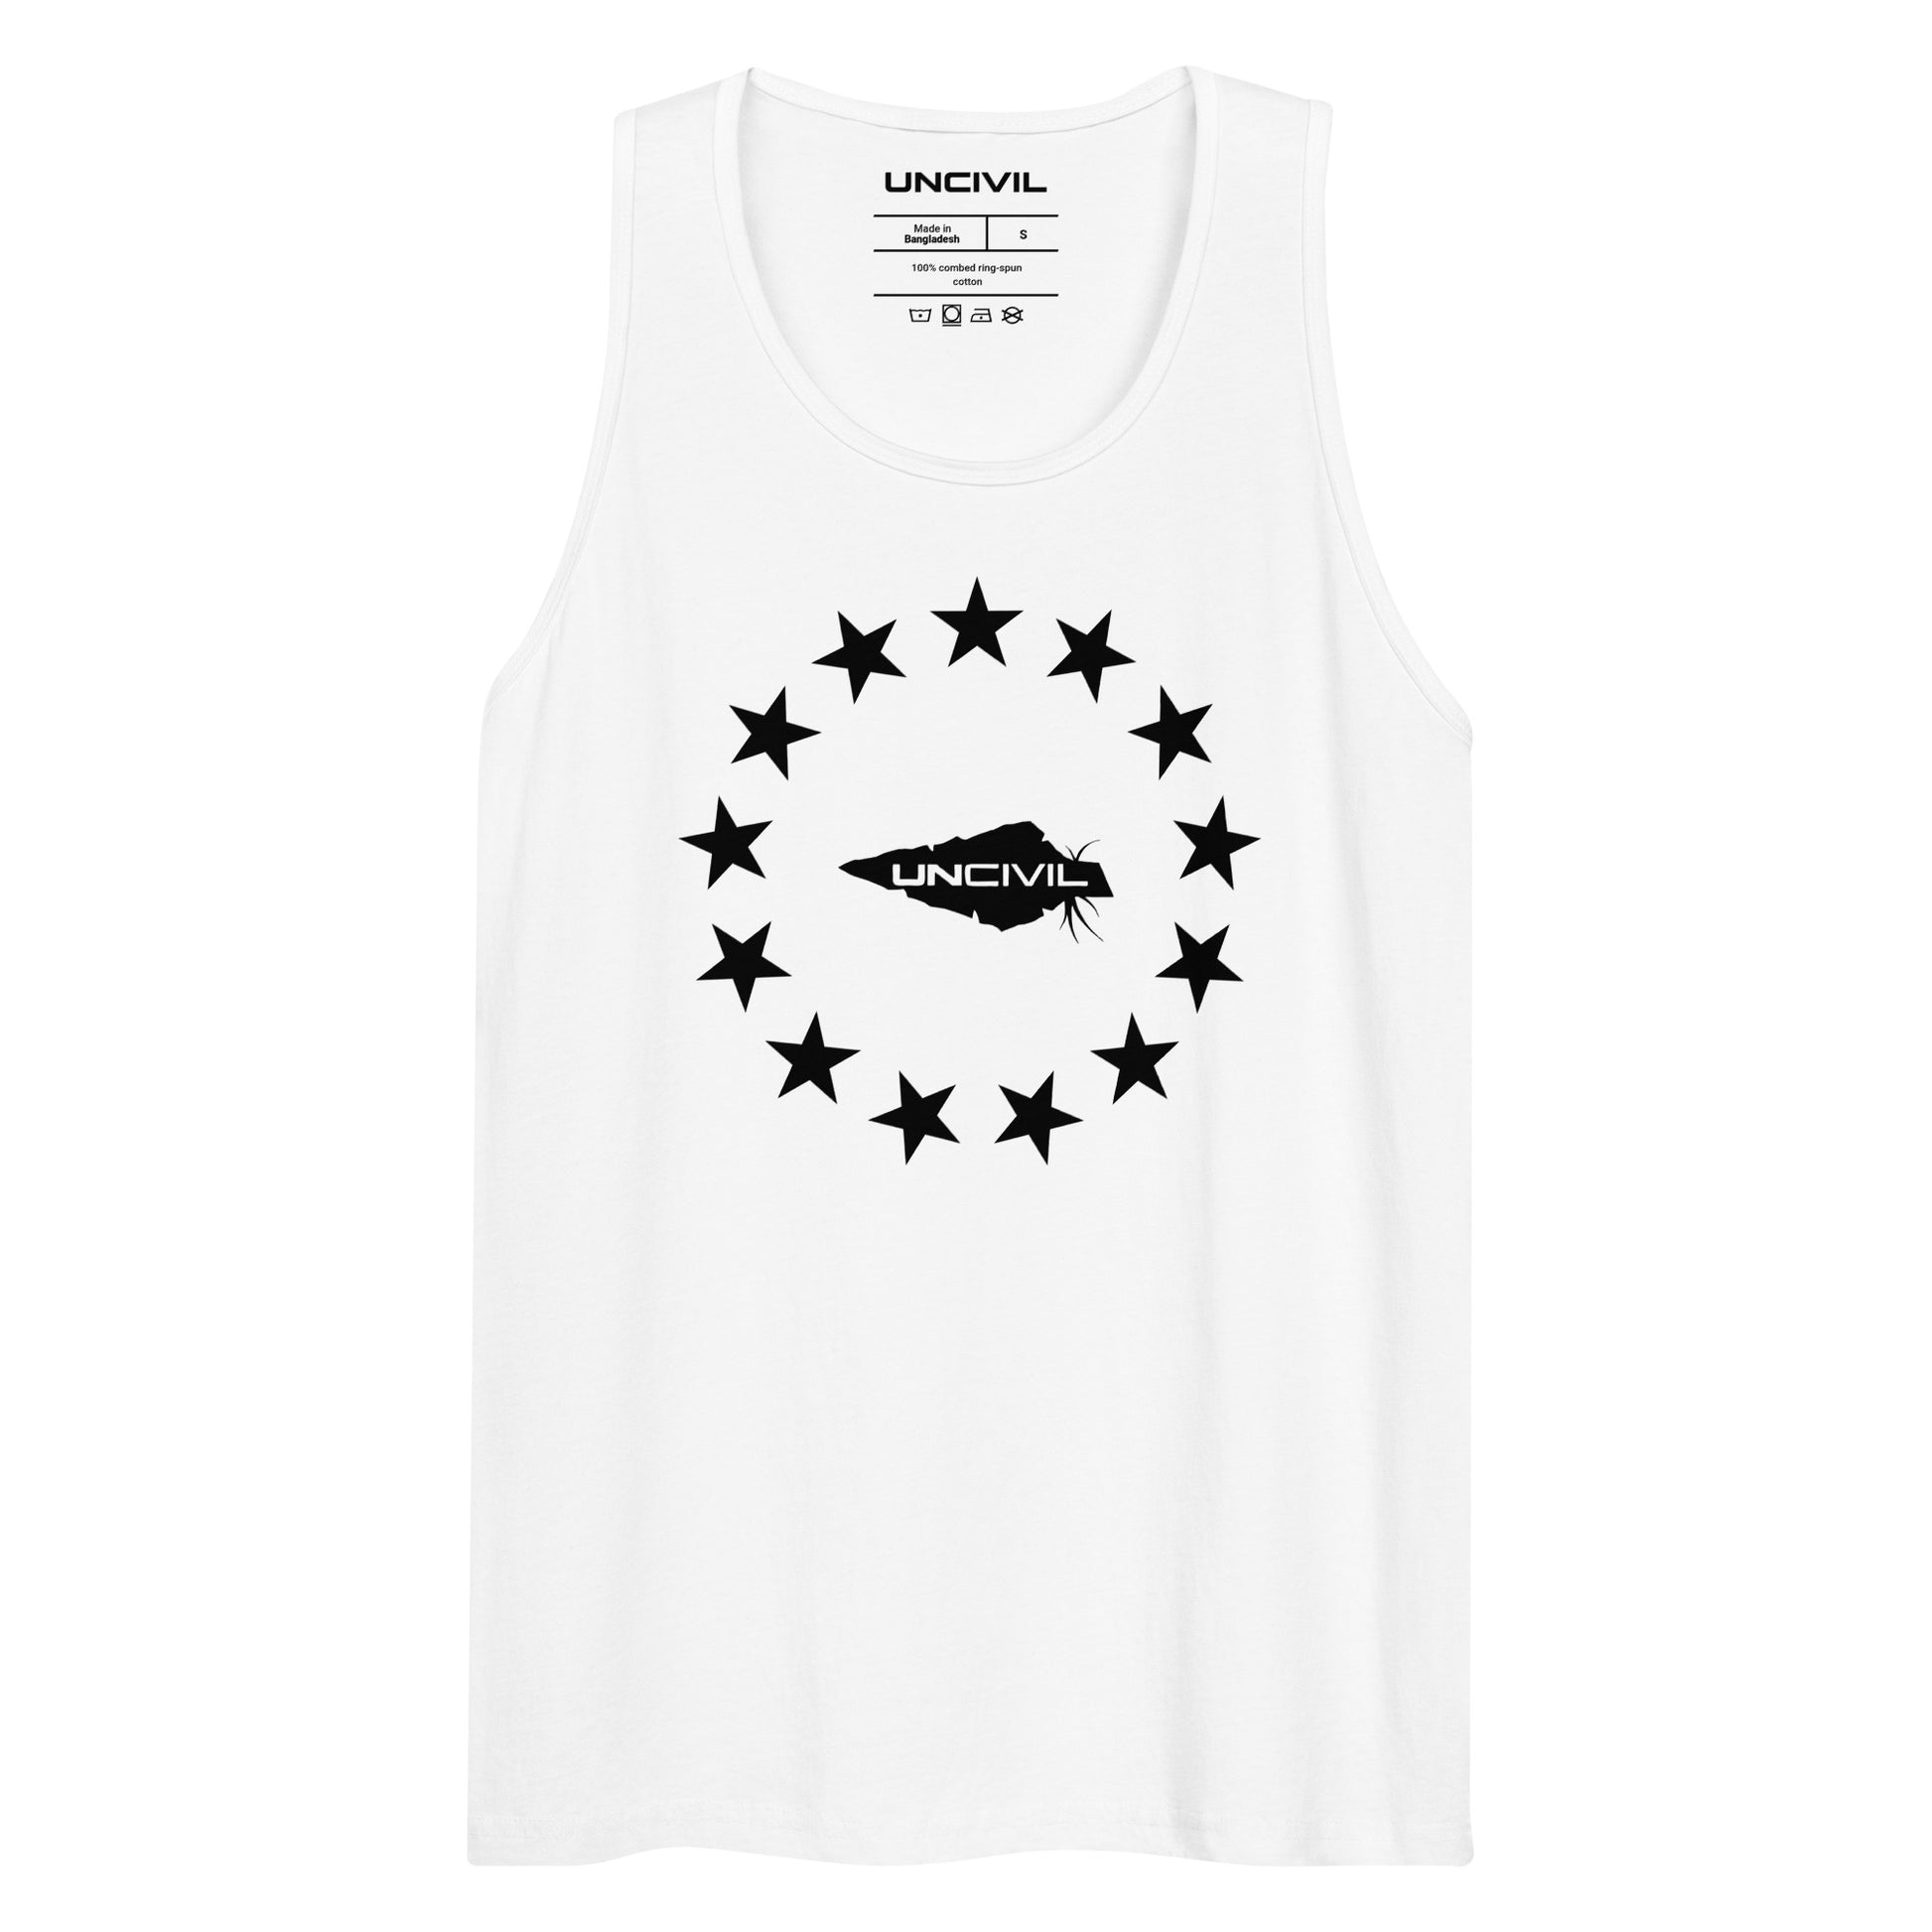 Betsy Ross men's tank top. Featuring the iconic 13 stars design, this tank is perfect for anyone who loves America and its rich history. White.